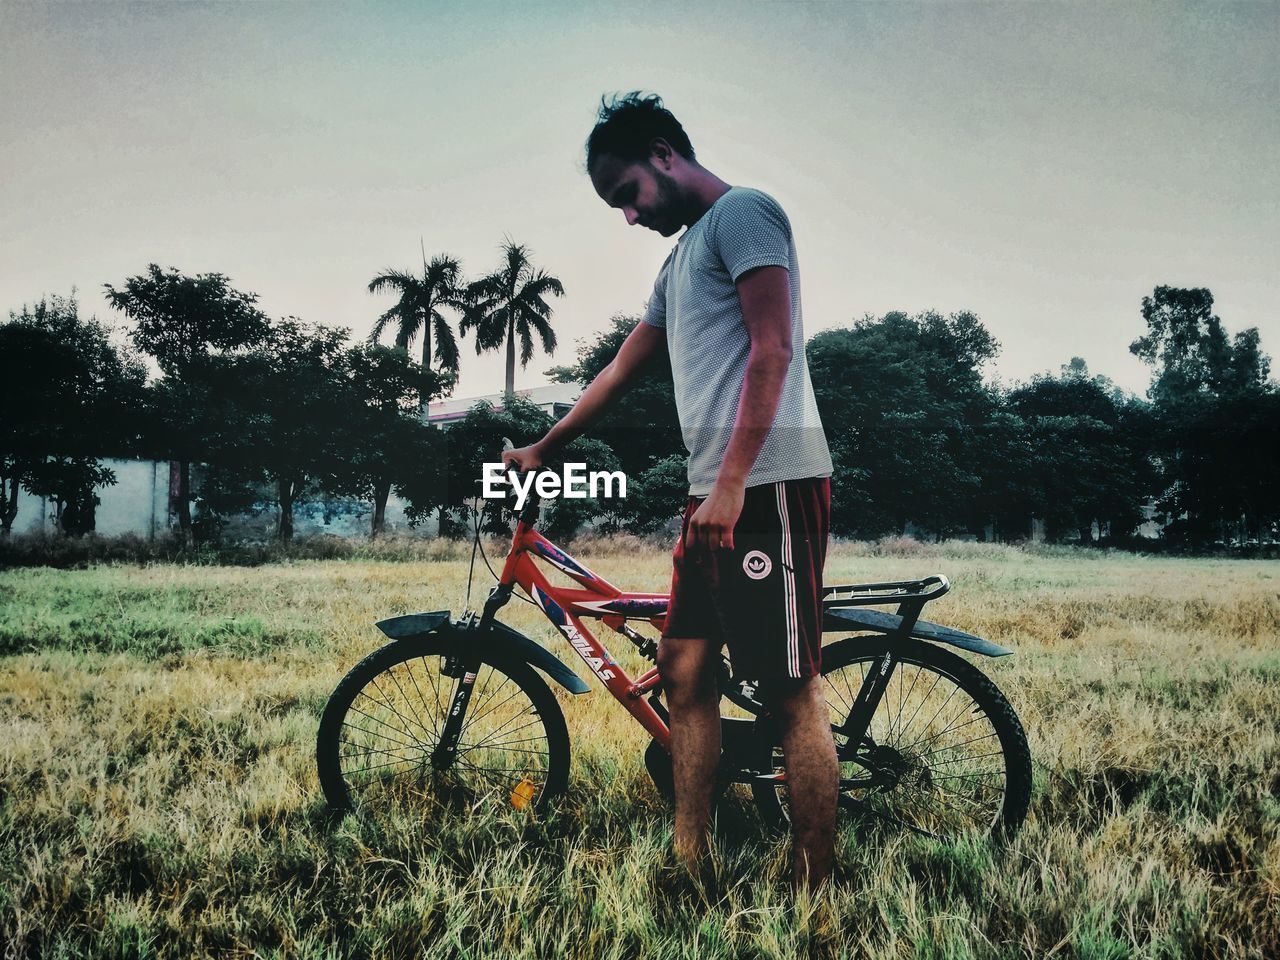 YOUNG MAN RIDING BICYCLE ON FIELD